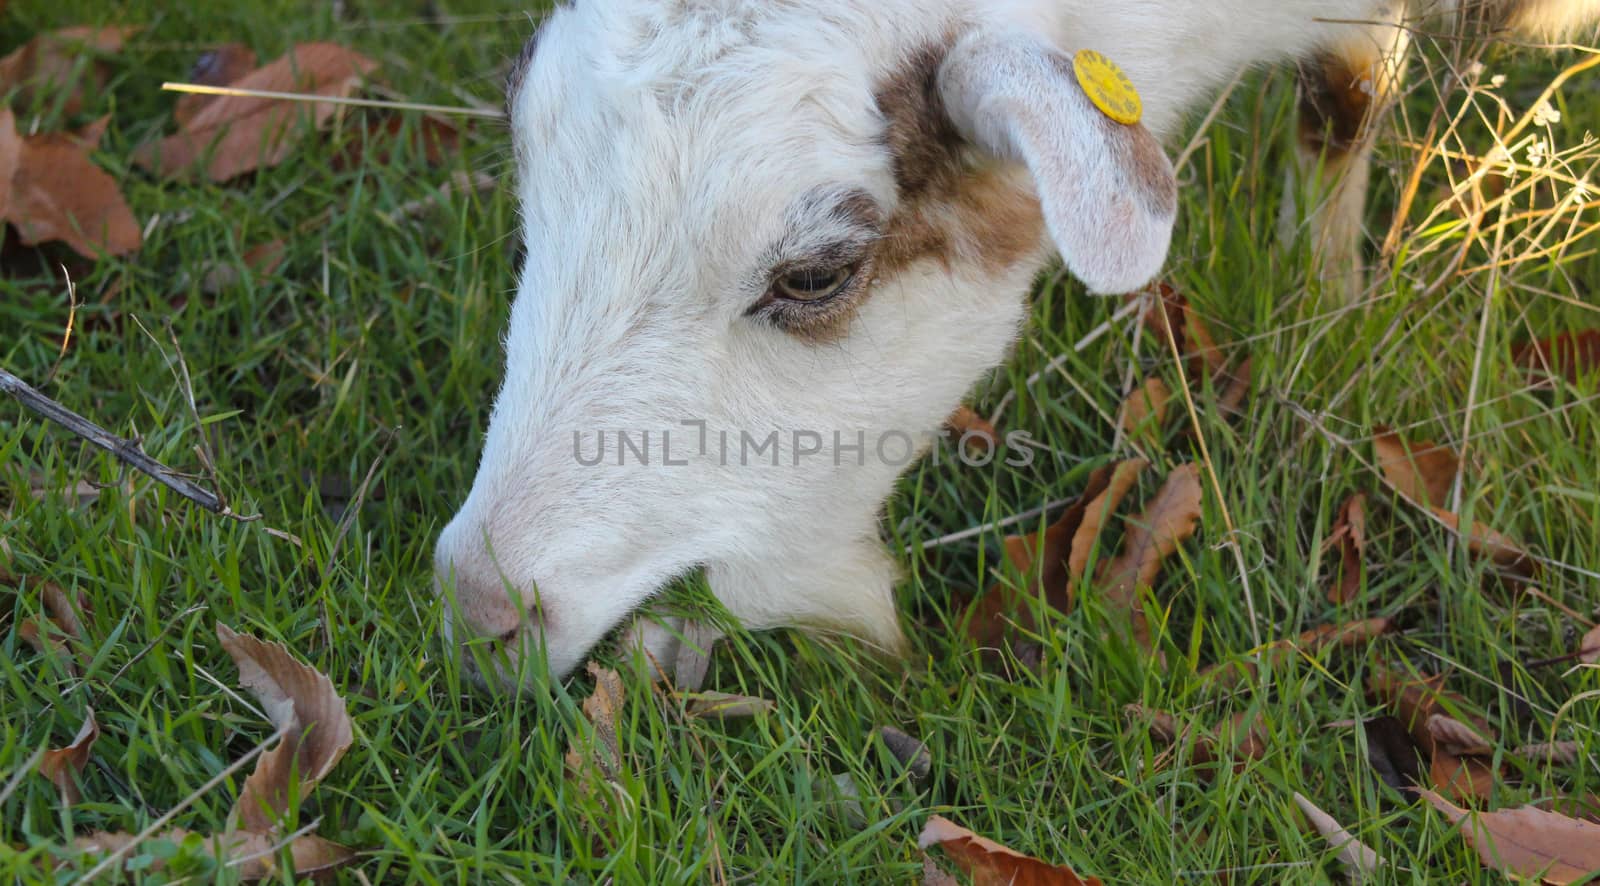 goat grazing in the field, domestic and farm animals theme by nehru